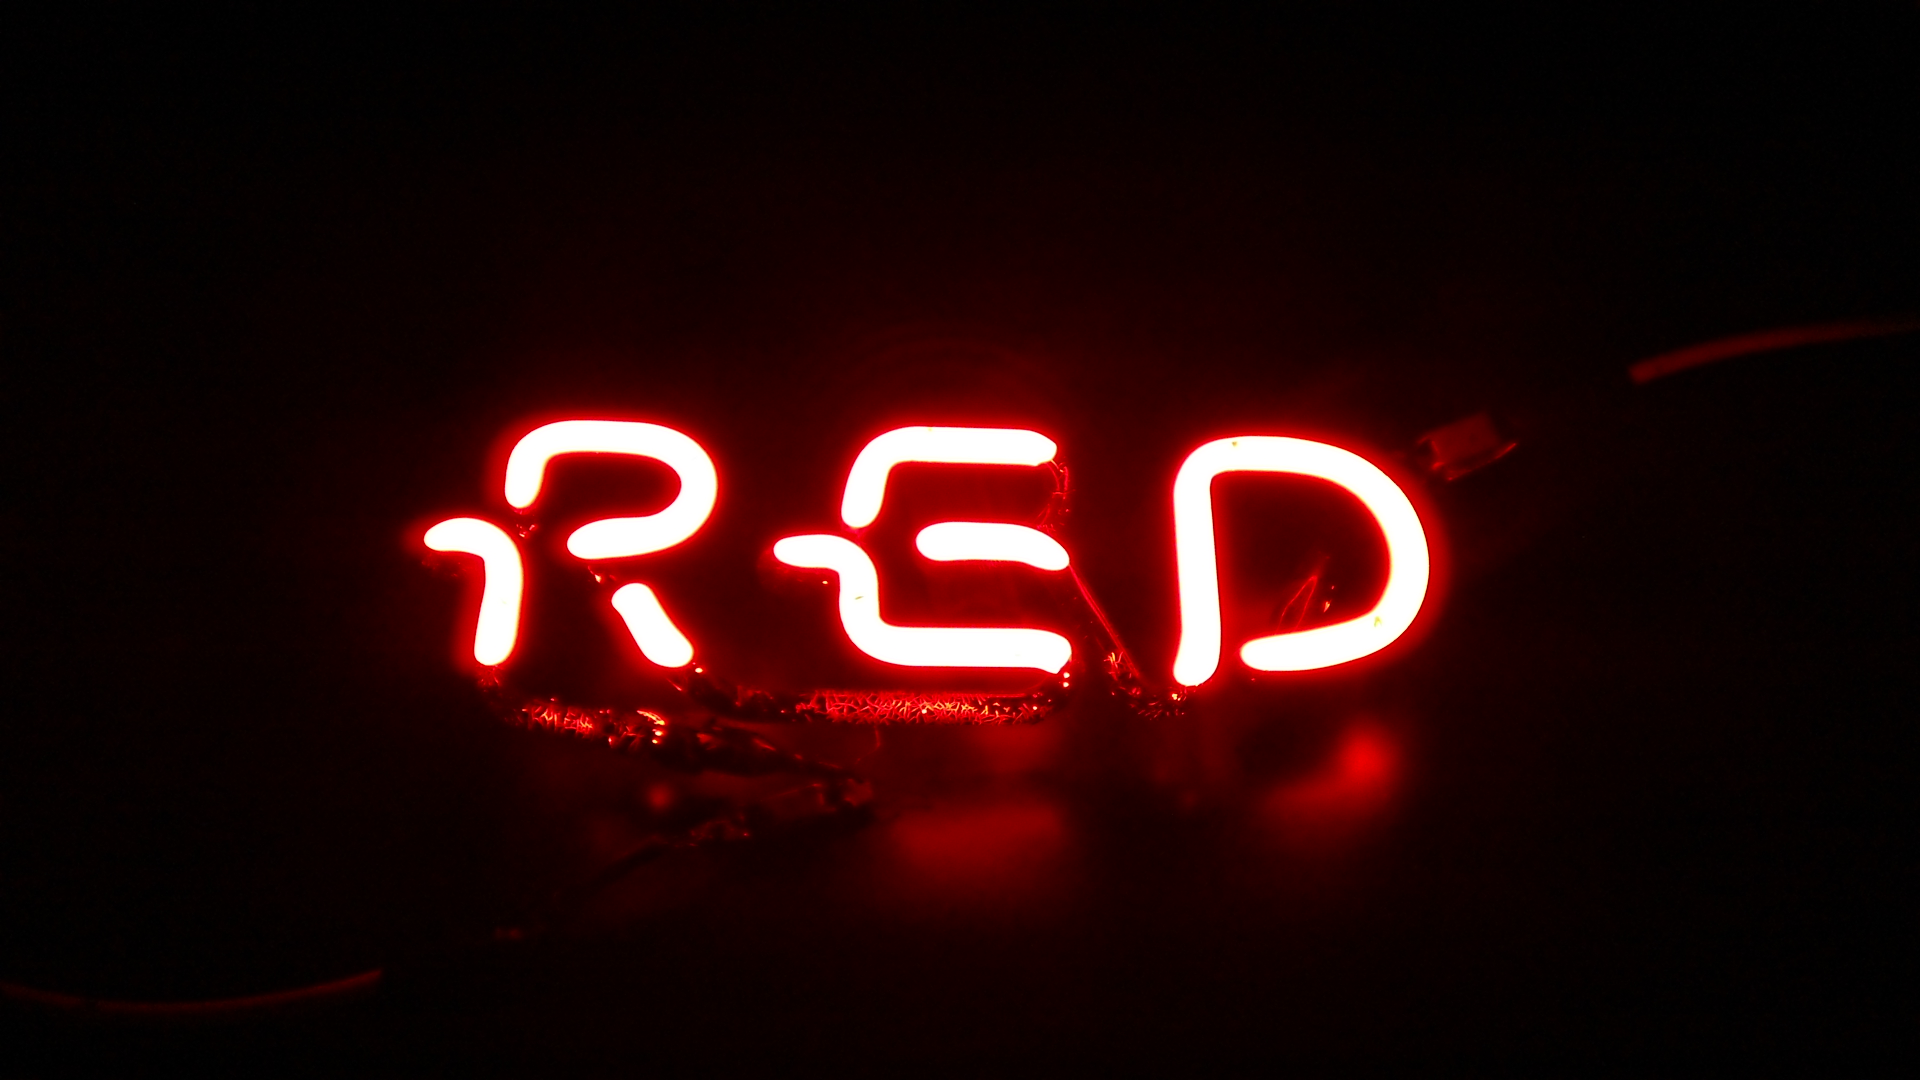 RED” neon section from Red Dog neon sign | The Neon Sign Guy Store